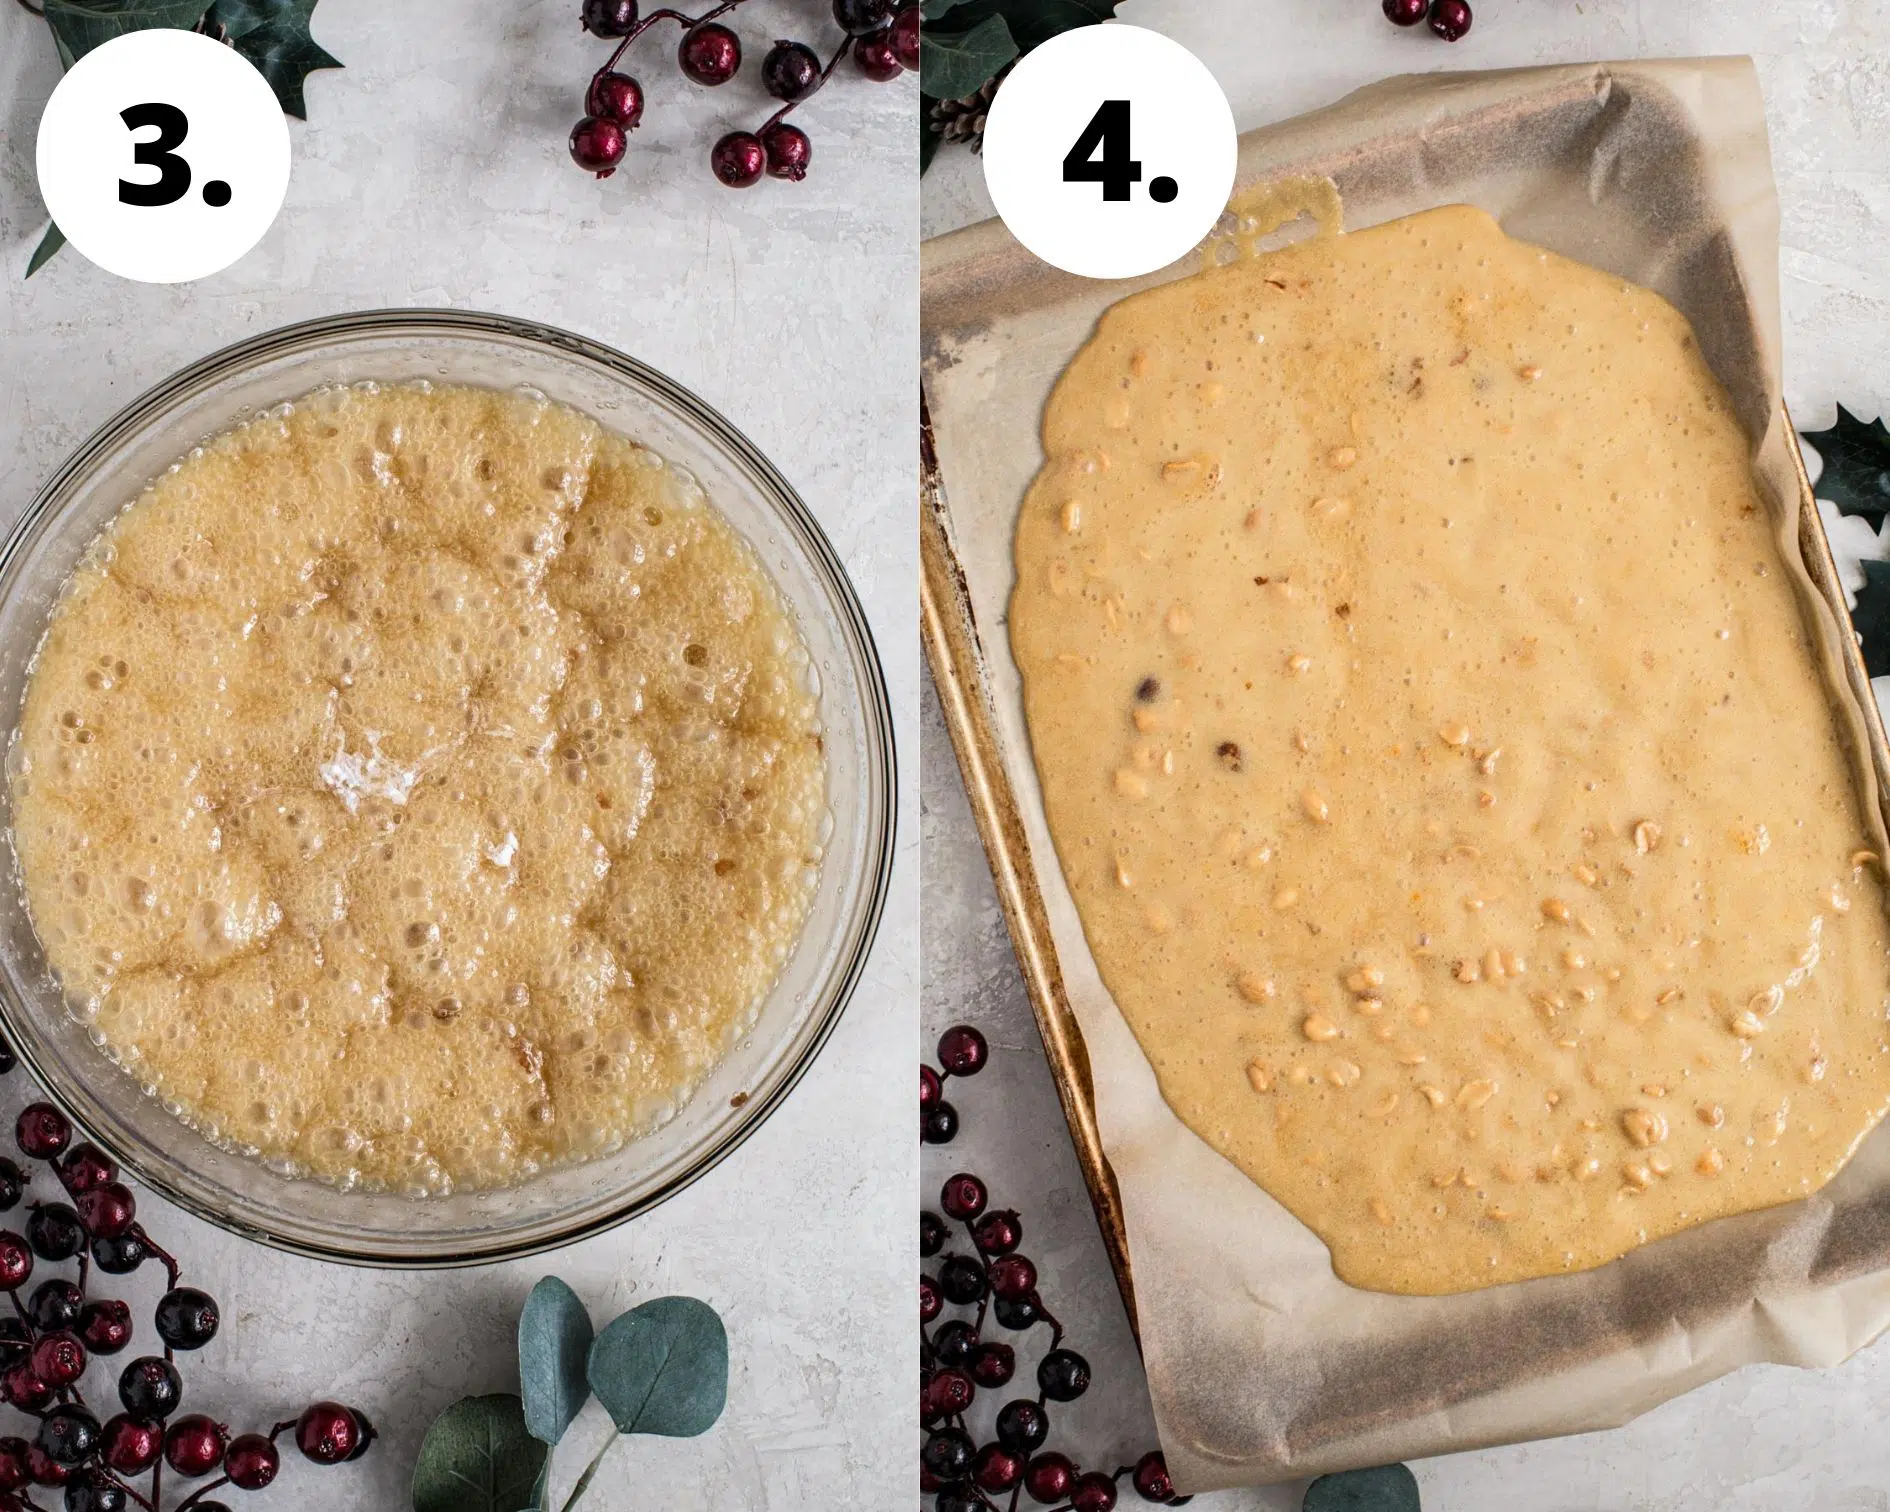 Microwave peanut brittle process steps 3 and 4.